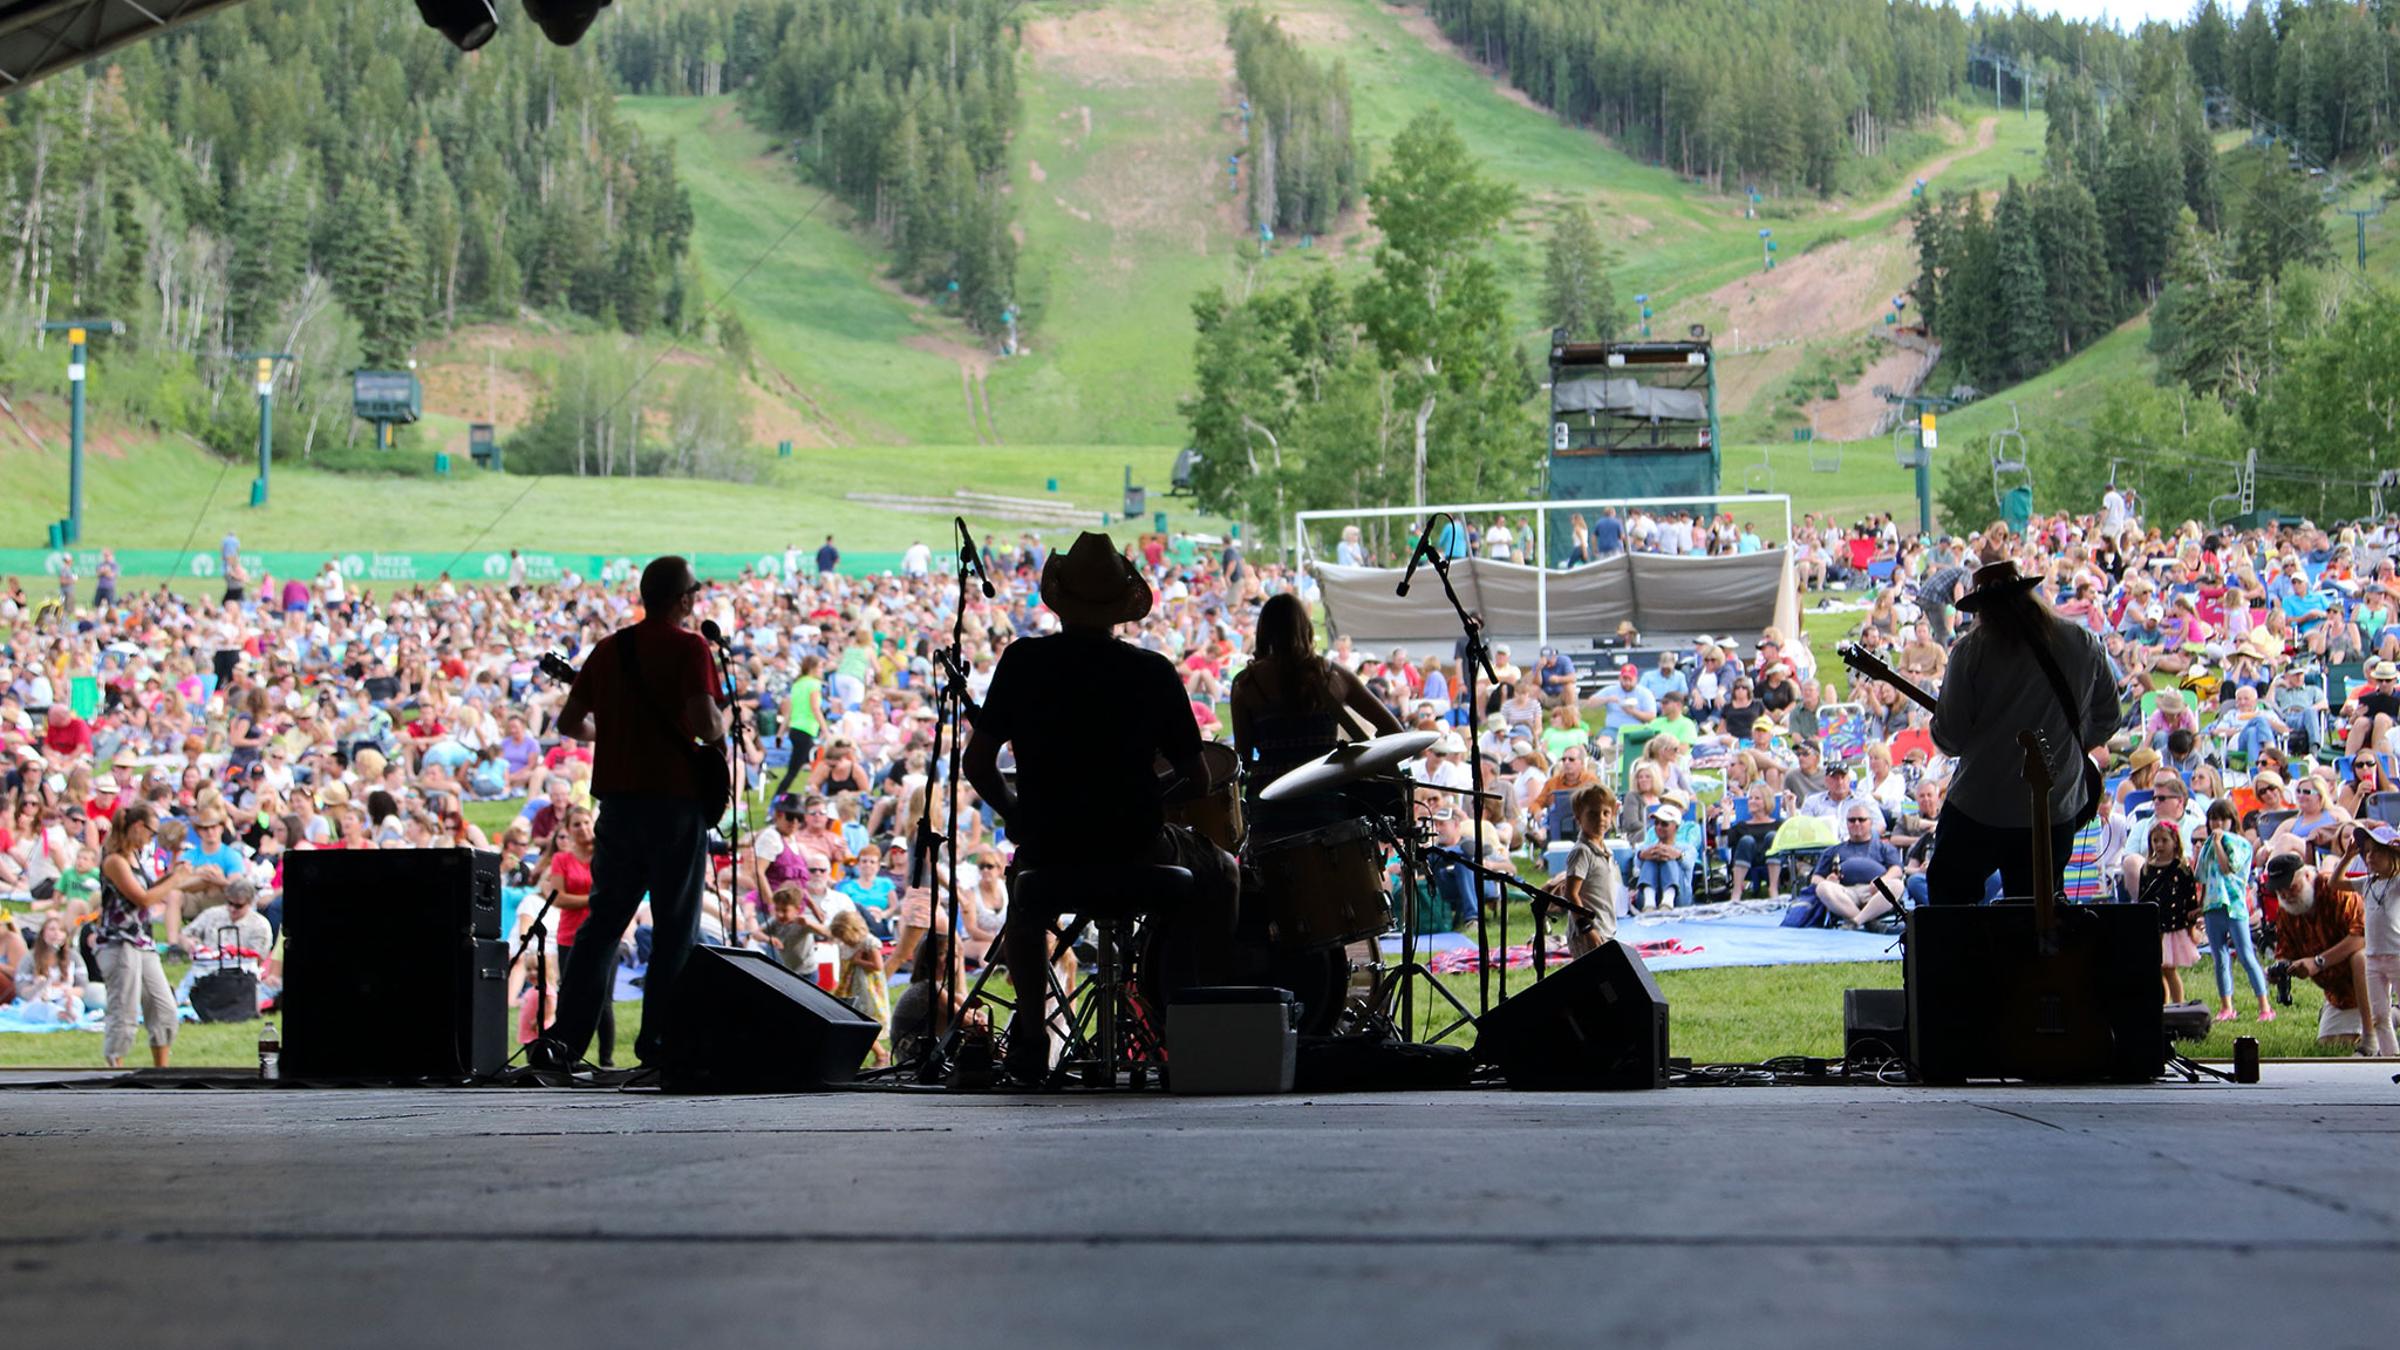 a band performing on the snow park outdoor amphitheater stage